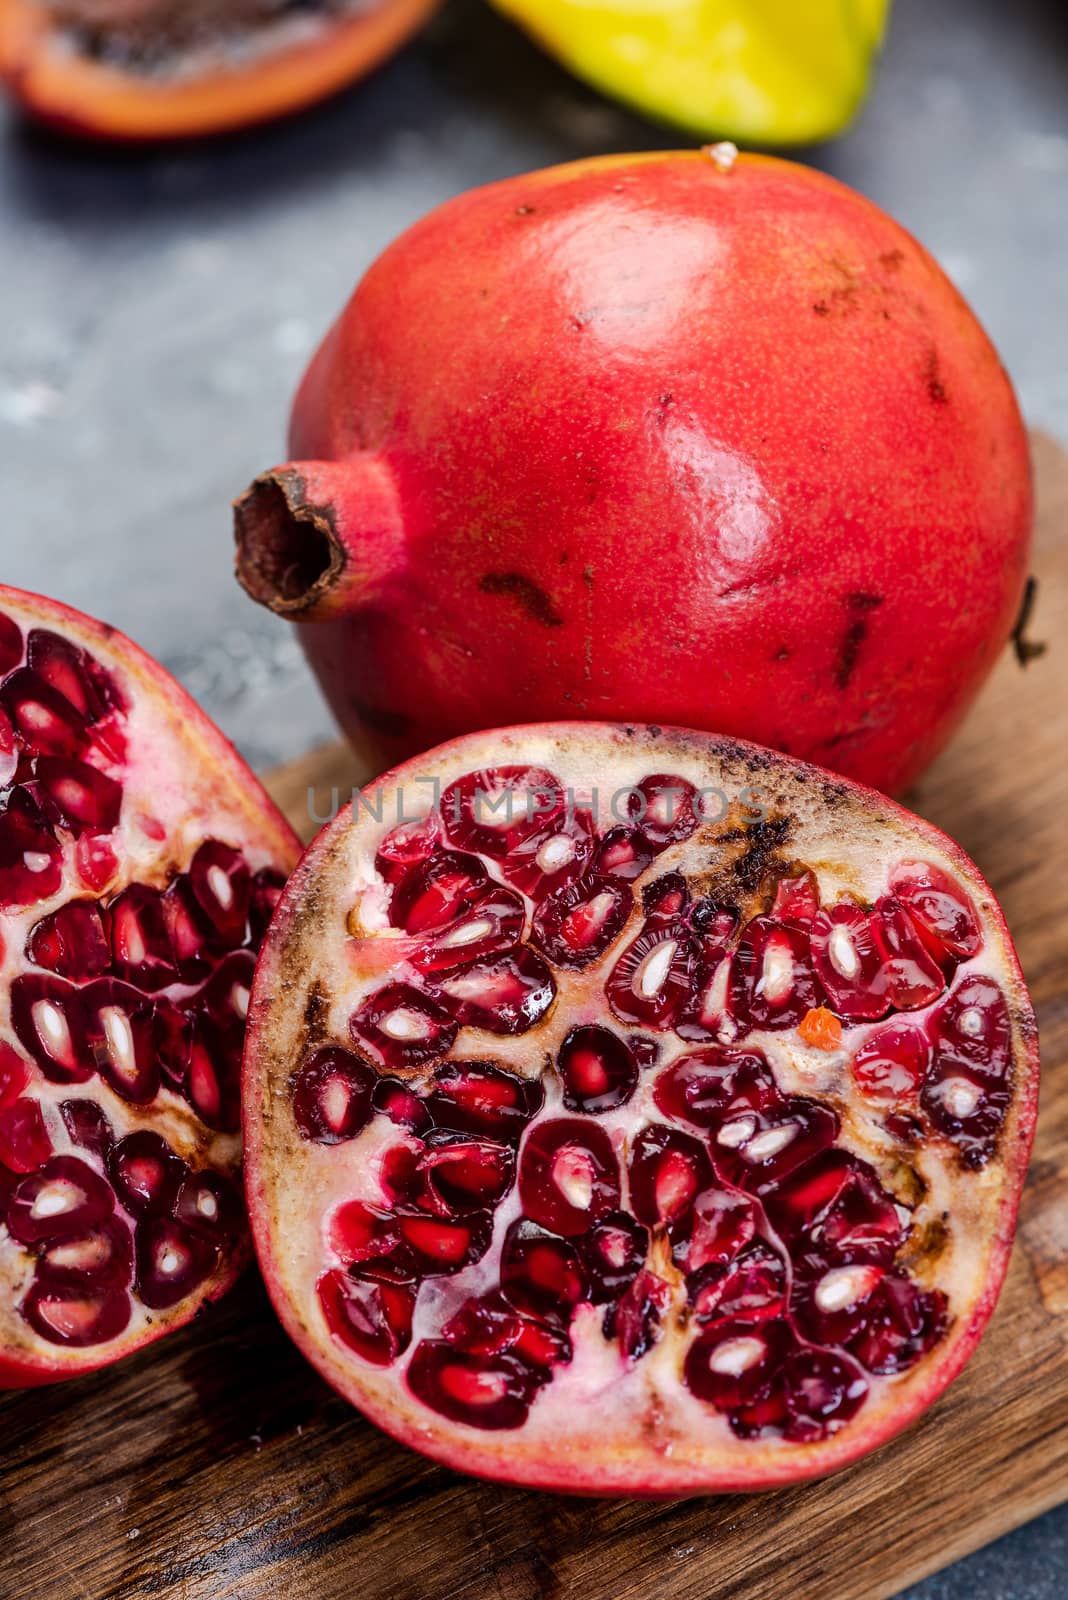 Pomegranate Tropical Fruit Cut in Half on Wooden Board by merc67